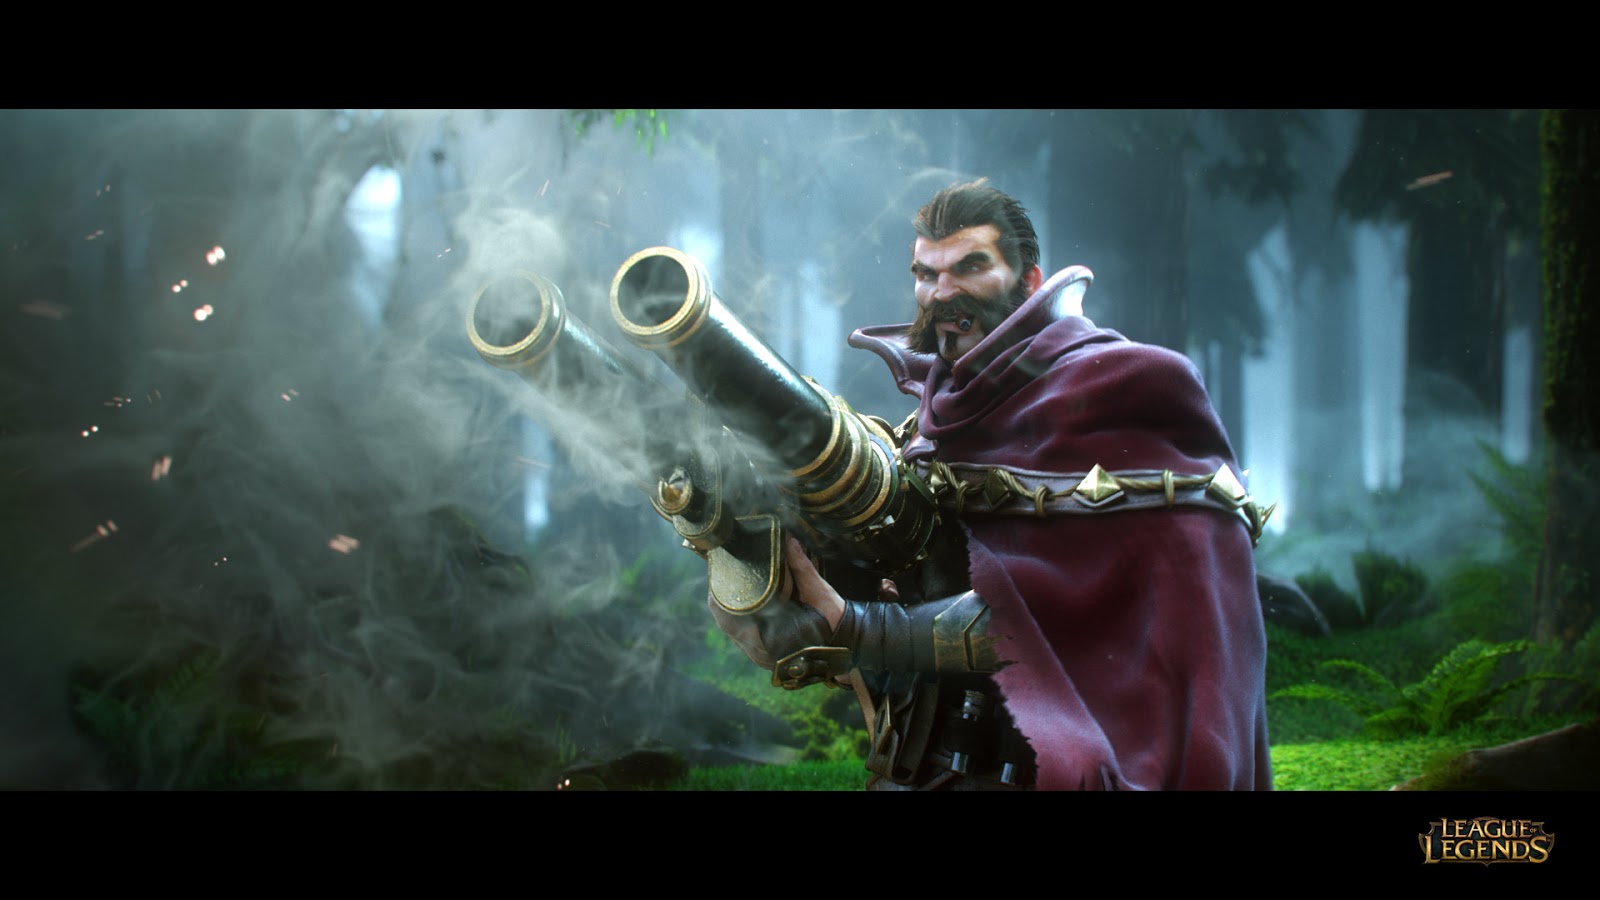 General 1600x900 League of Legends video games PC gaming weapon video game art fantasy art fantasy men beard cigars video game men Graves (League of Legends)